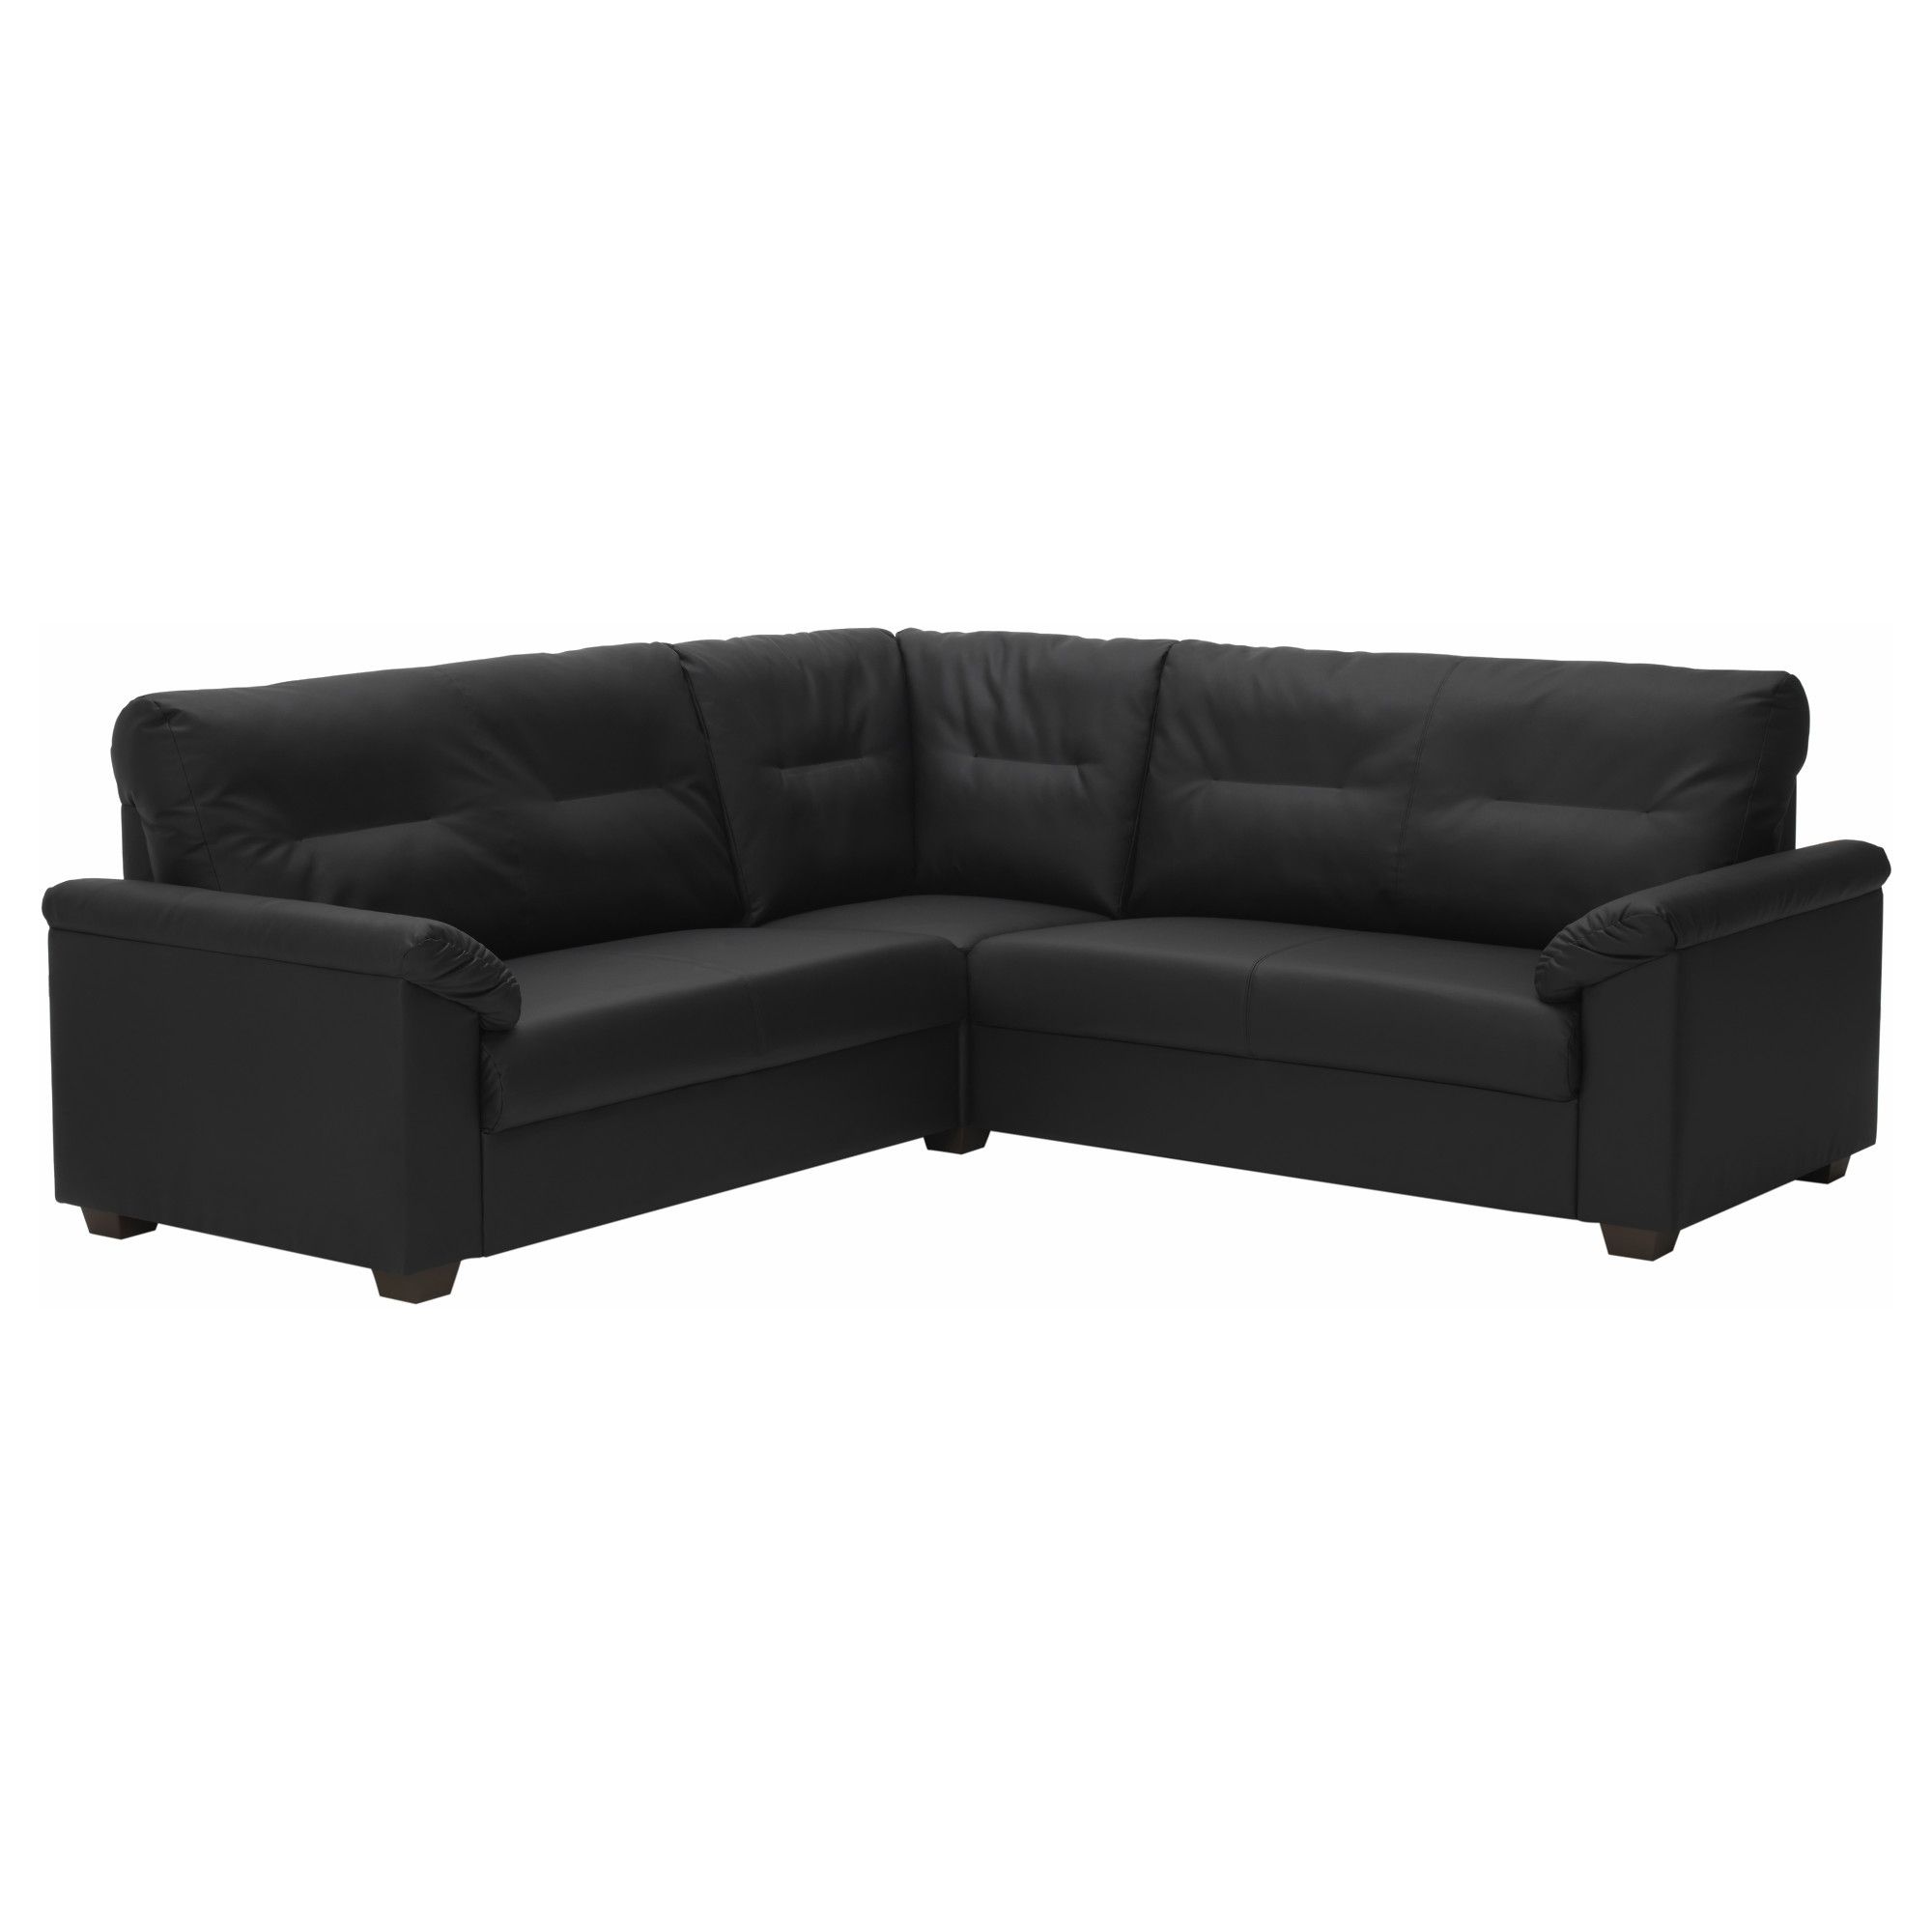 Leather Faux Leather Couches Chairs Ottomans Ikea In 4 Seat Leather Sofas (View 1 of 15)